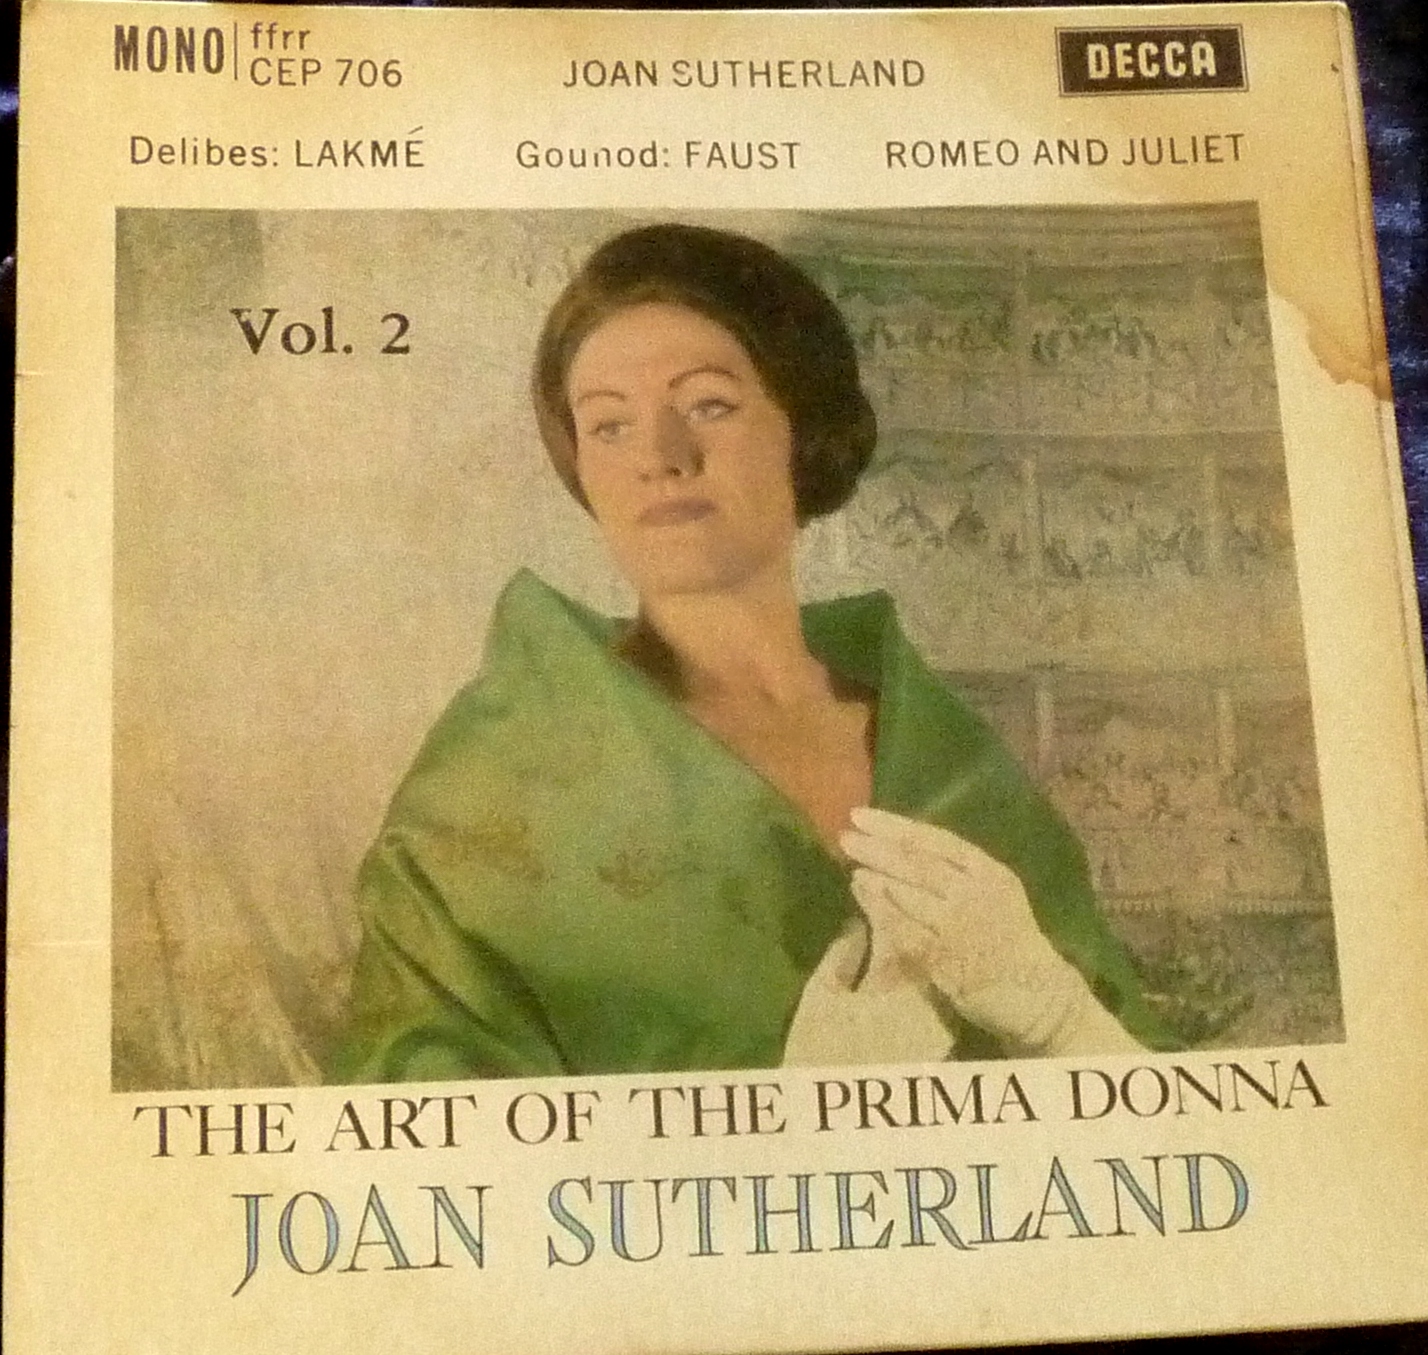 The Art of the Prima Donna No.2 - Joan Sutherland